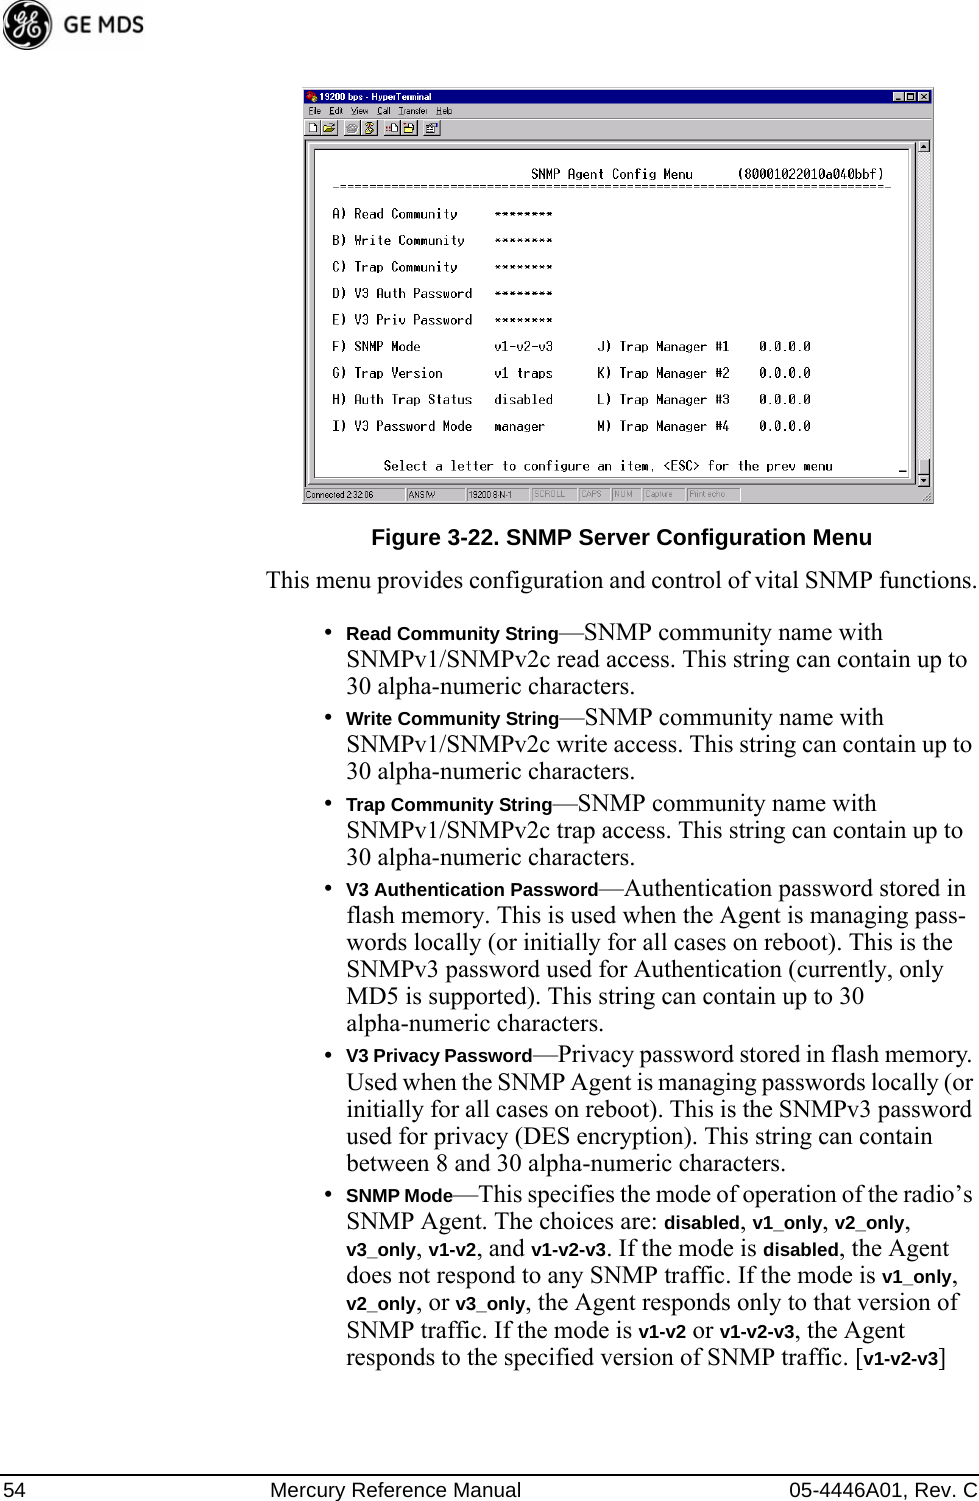 54 Mercury Reference Manual 05-4446A01, Rev. CInvisible place holderFigure 3-22. SNMP Server Configuration MenuThis menu provides configuration and control of vital SNMP functions.•Read Community String—SNMP community name with SNMPv1/SNMPv2c read access. This string can contain up to 30 alpha-numeric characters.•Write Community String—SNMP community name with SNMPv1/SNMPv2c write access. This string can contain up to 30 alpha-numeric characters.•Trap Community String—SNMP community name with SNMPv1/SNMPv2c trap access. This string can contain up to 30 alpha-numeric characters.•V3 Authentication Password—Authentication password stored in flash memory. This is used when the Agent is managing pass-words locally (or initially for all cases on reboot). This is the SNMPv3 password used for Authentication (currently, only MD5 is supported). This string can contain up to 30 alpha-numeric characters.•V3 Privacy Password—Privacy password stored in flash memory. Used when the SNMP Agent is managing passwords locally (or initially for all cases on reboot). This is the SNMPv3 password used for privacy (DES encryption). This string can contain between 8 and 30 alpha-numeric characters.•SNMP Mode—This specifies the mode of operation of the radio’s SNMP Agent. The choices are: disabled, v1_only, v2_only, v3_only, v1-v2, and v1-v2-v3. If the mode is disabled, the Agent does not respond to any SNMP traffic. If the mode is v1_only, v2_only, or v3_only, the Agent responds only to that version of SNMP traffic. If the mode is v1-v2 or v1-v2-v3, the Agent responds to the specified version of SNMP traffic. [v1-v2-v3]